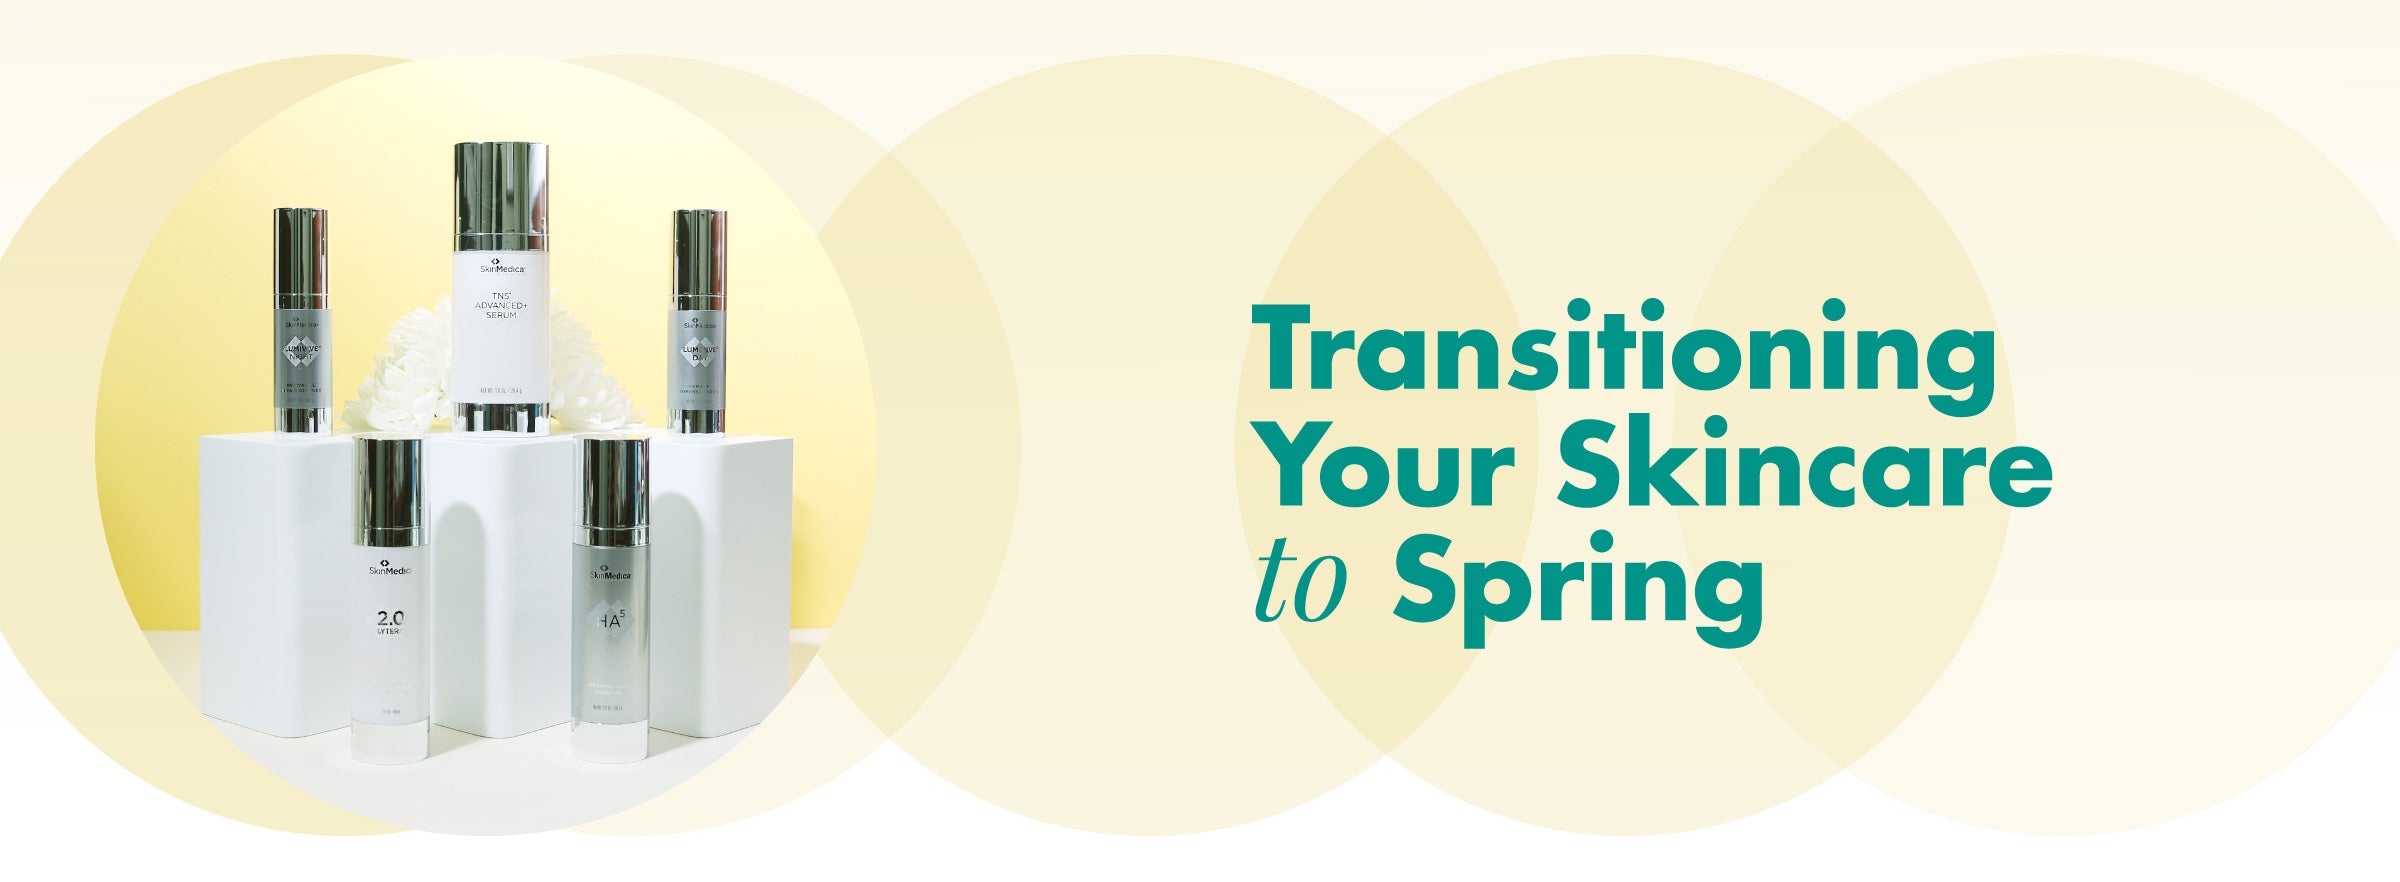 Transitioning Your Skincare to Spring